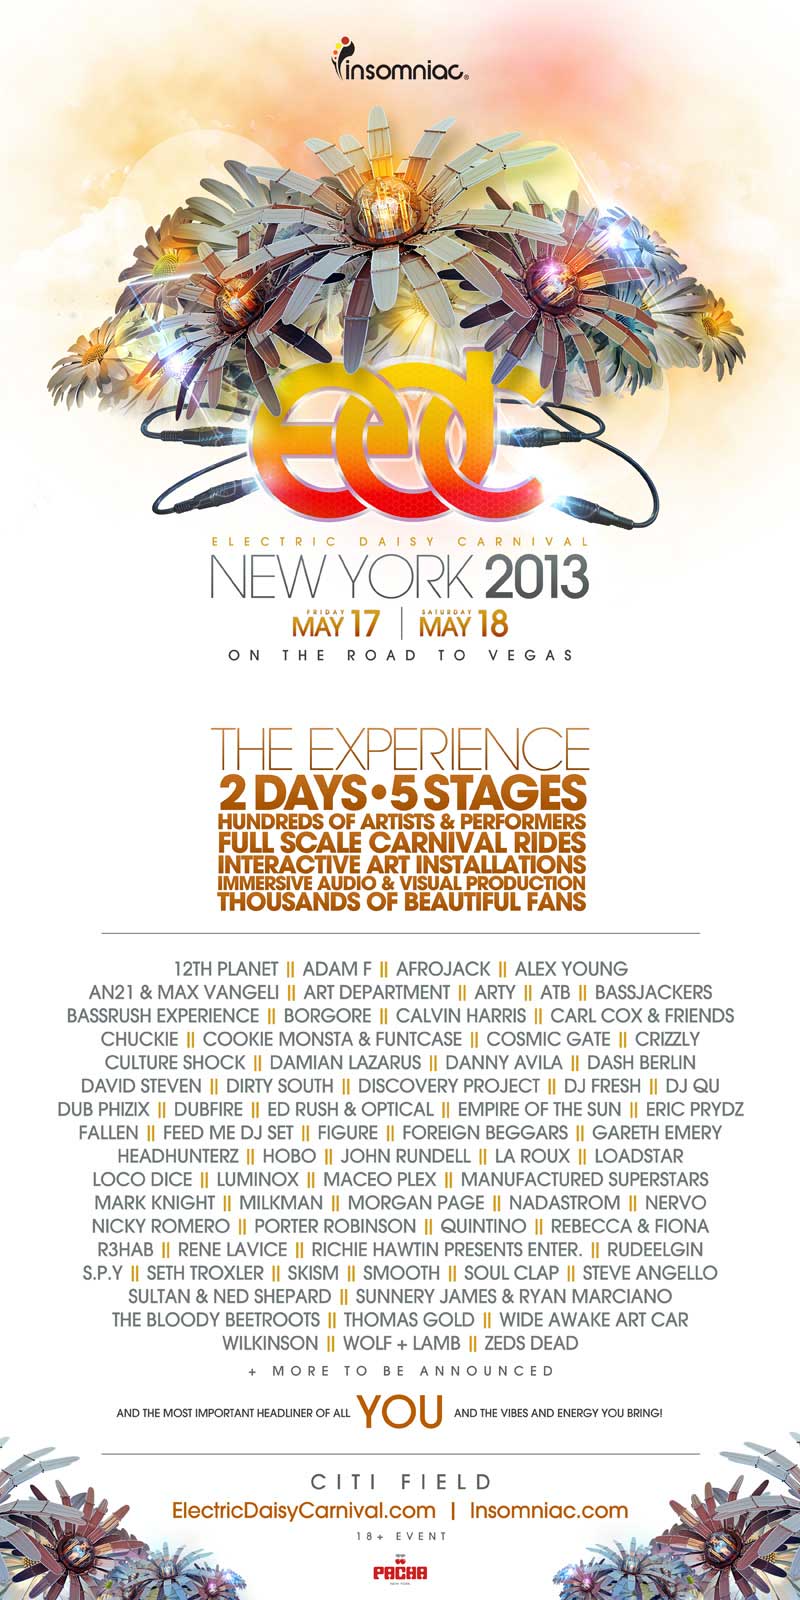 Electric Daisy Carnival New York 2013 Lineup Announced